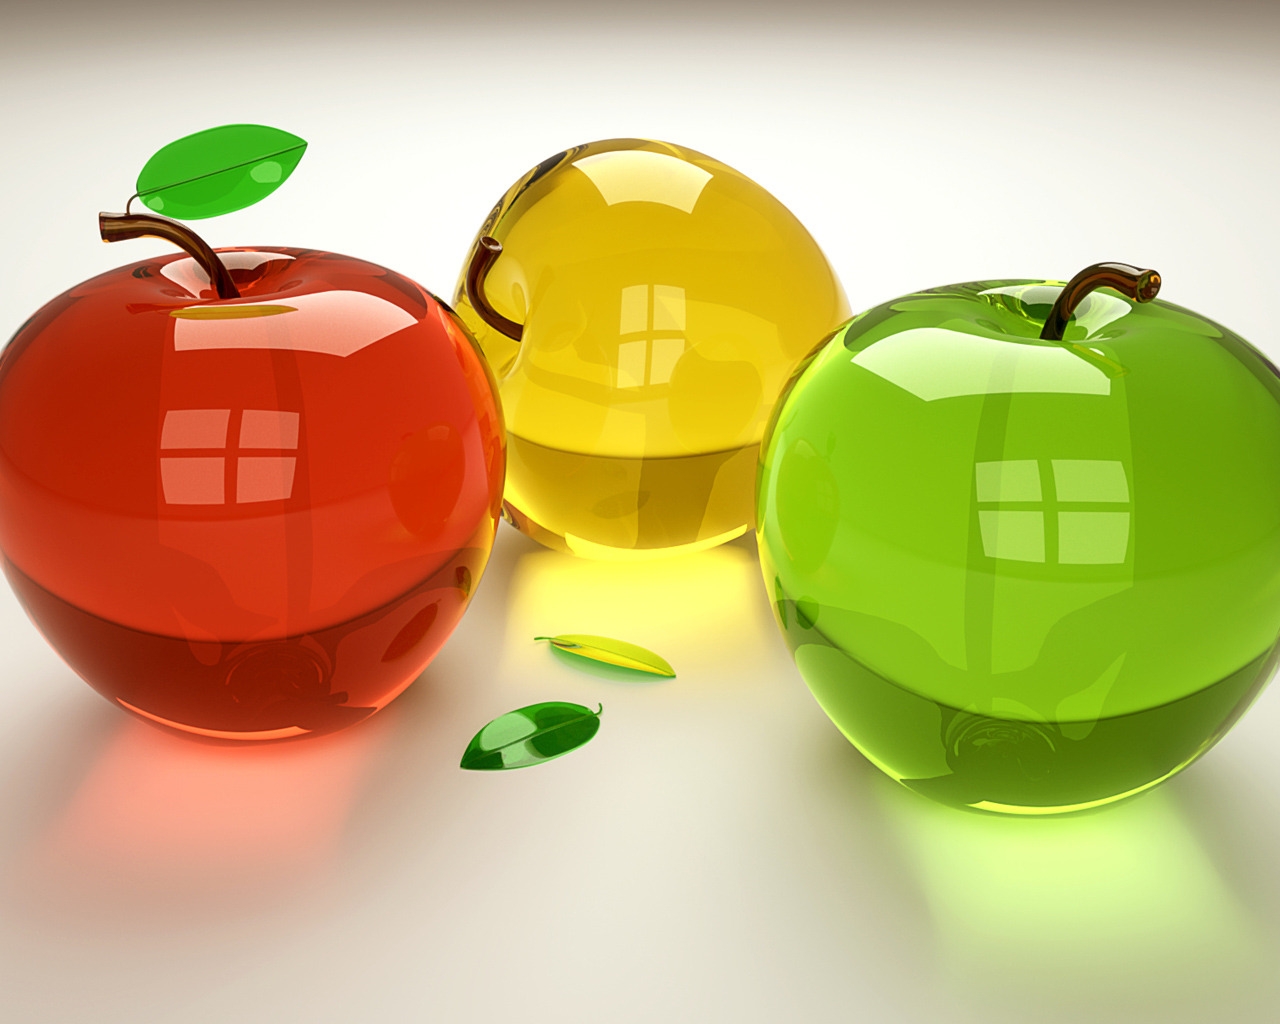 Glass Apples for 1280 x 1024 resolution